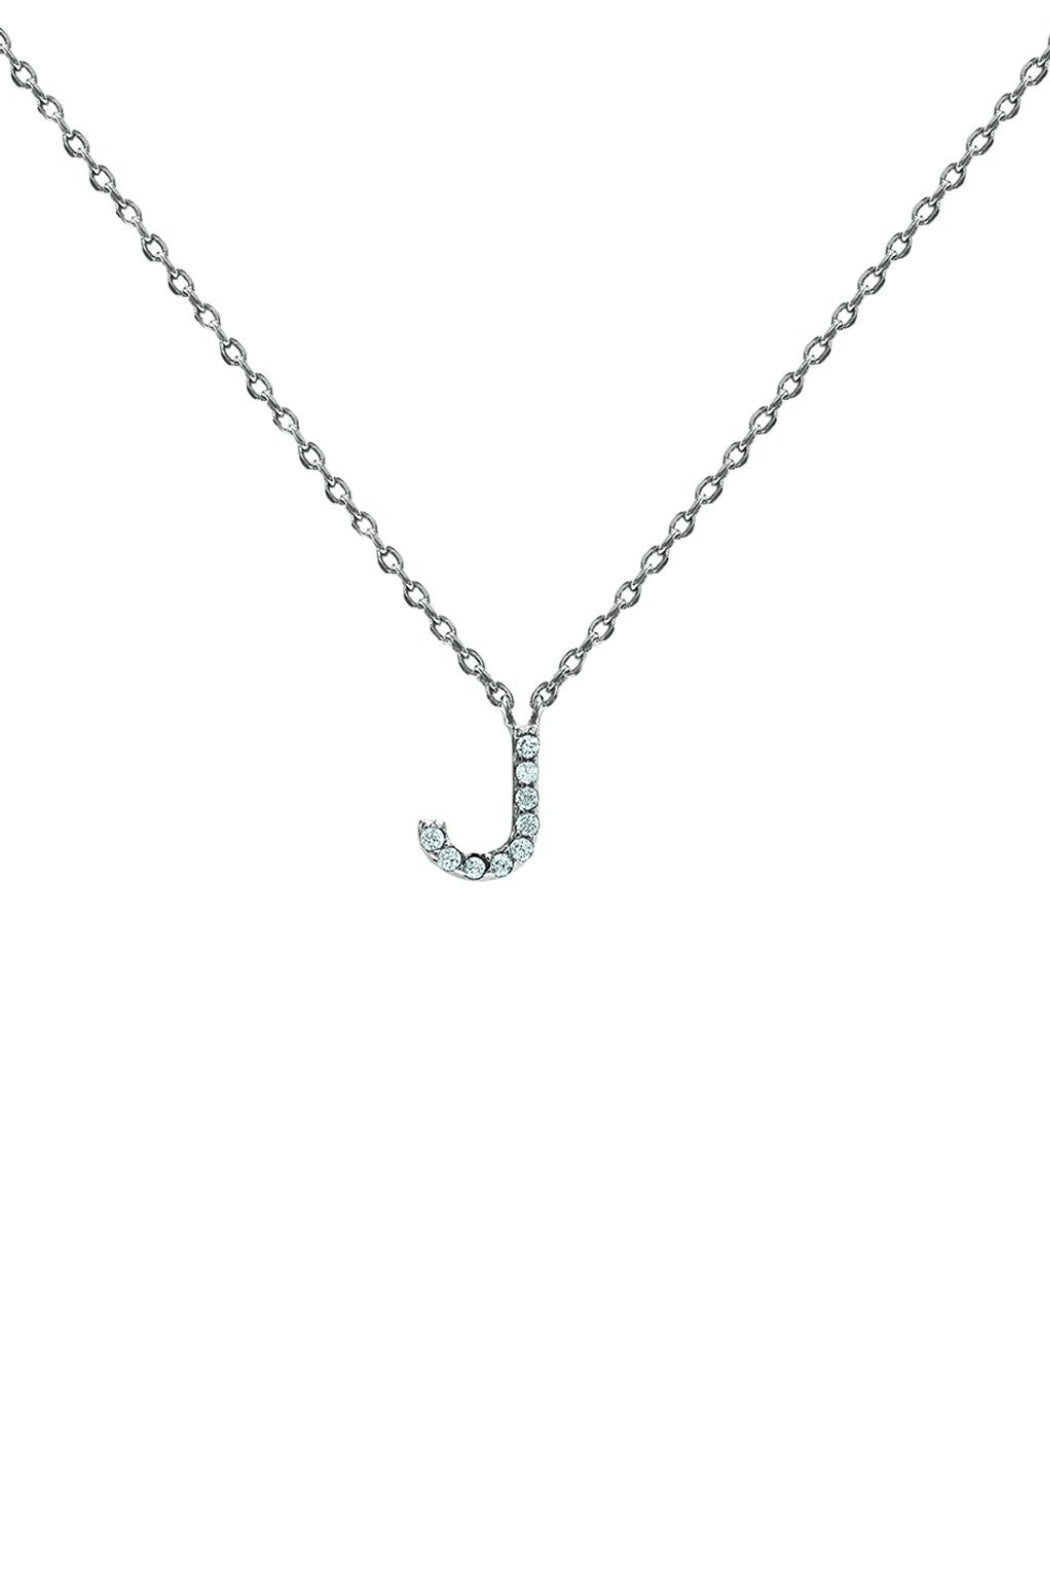 Block CZ Initial Necklace - Embellish Your Life 